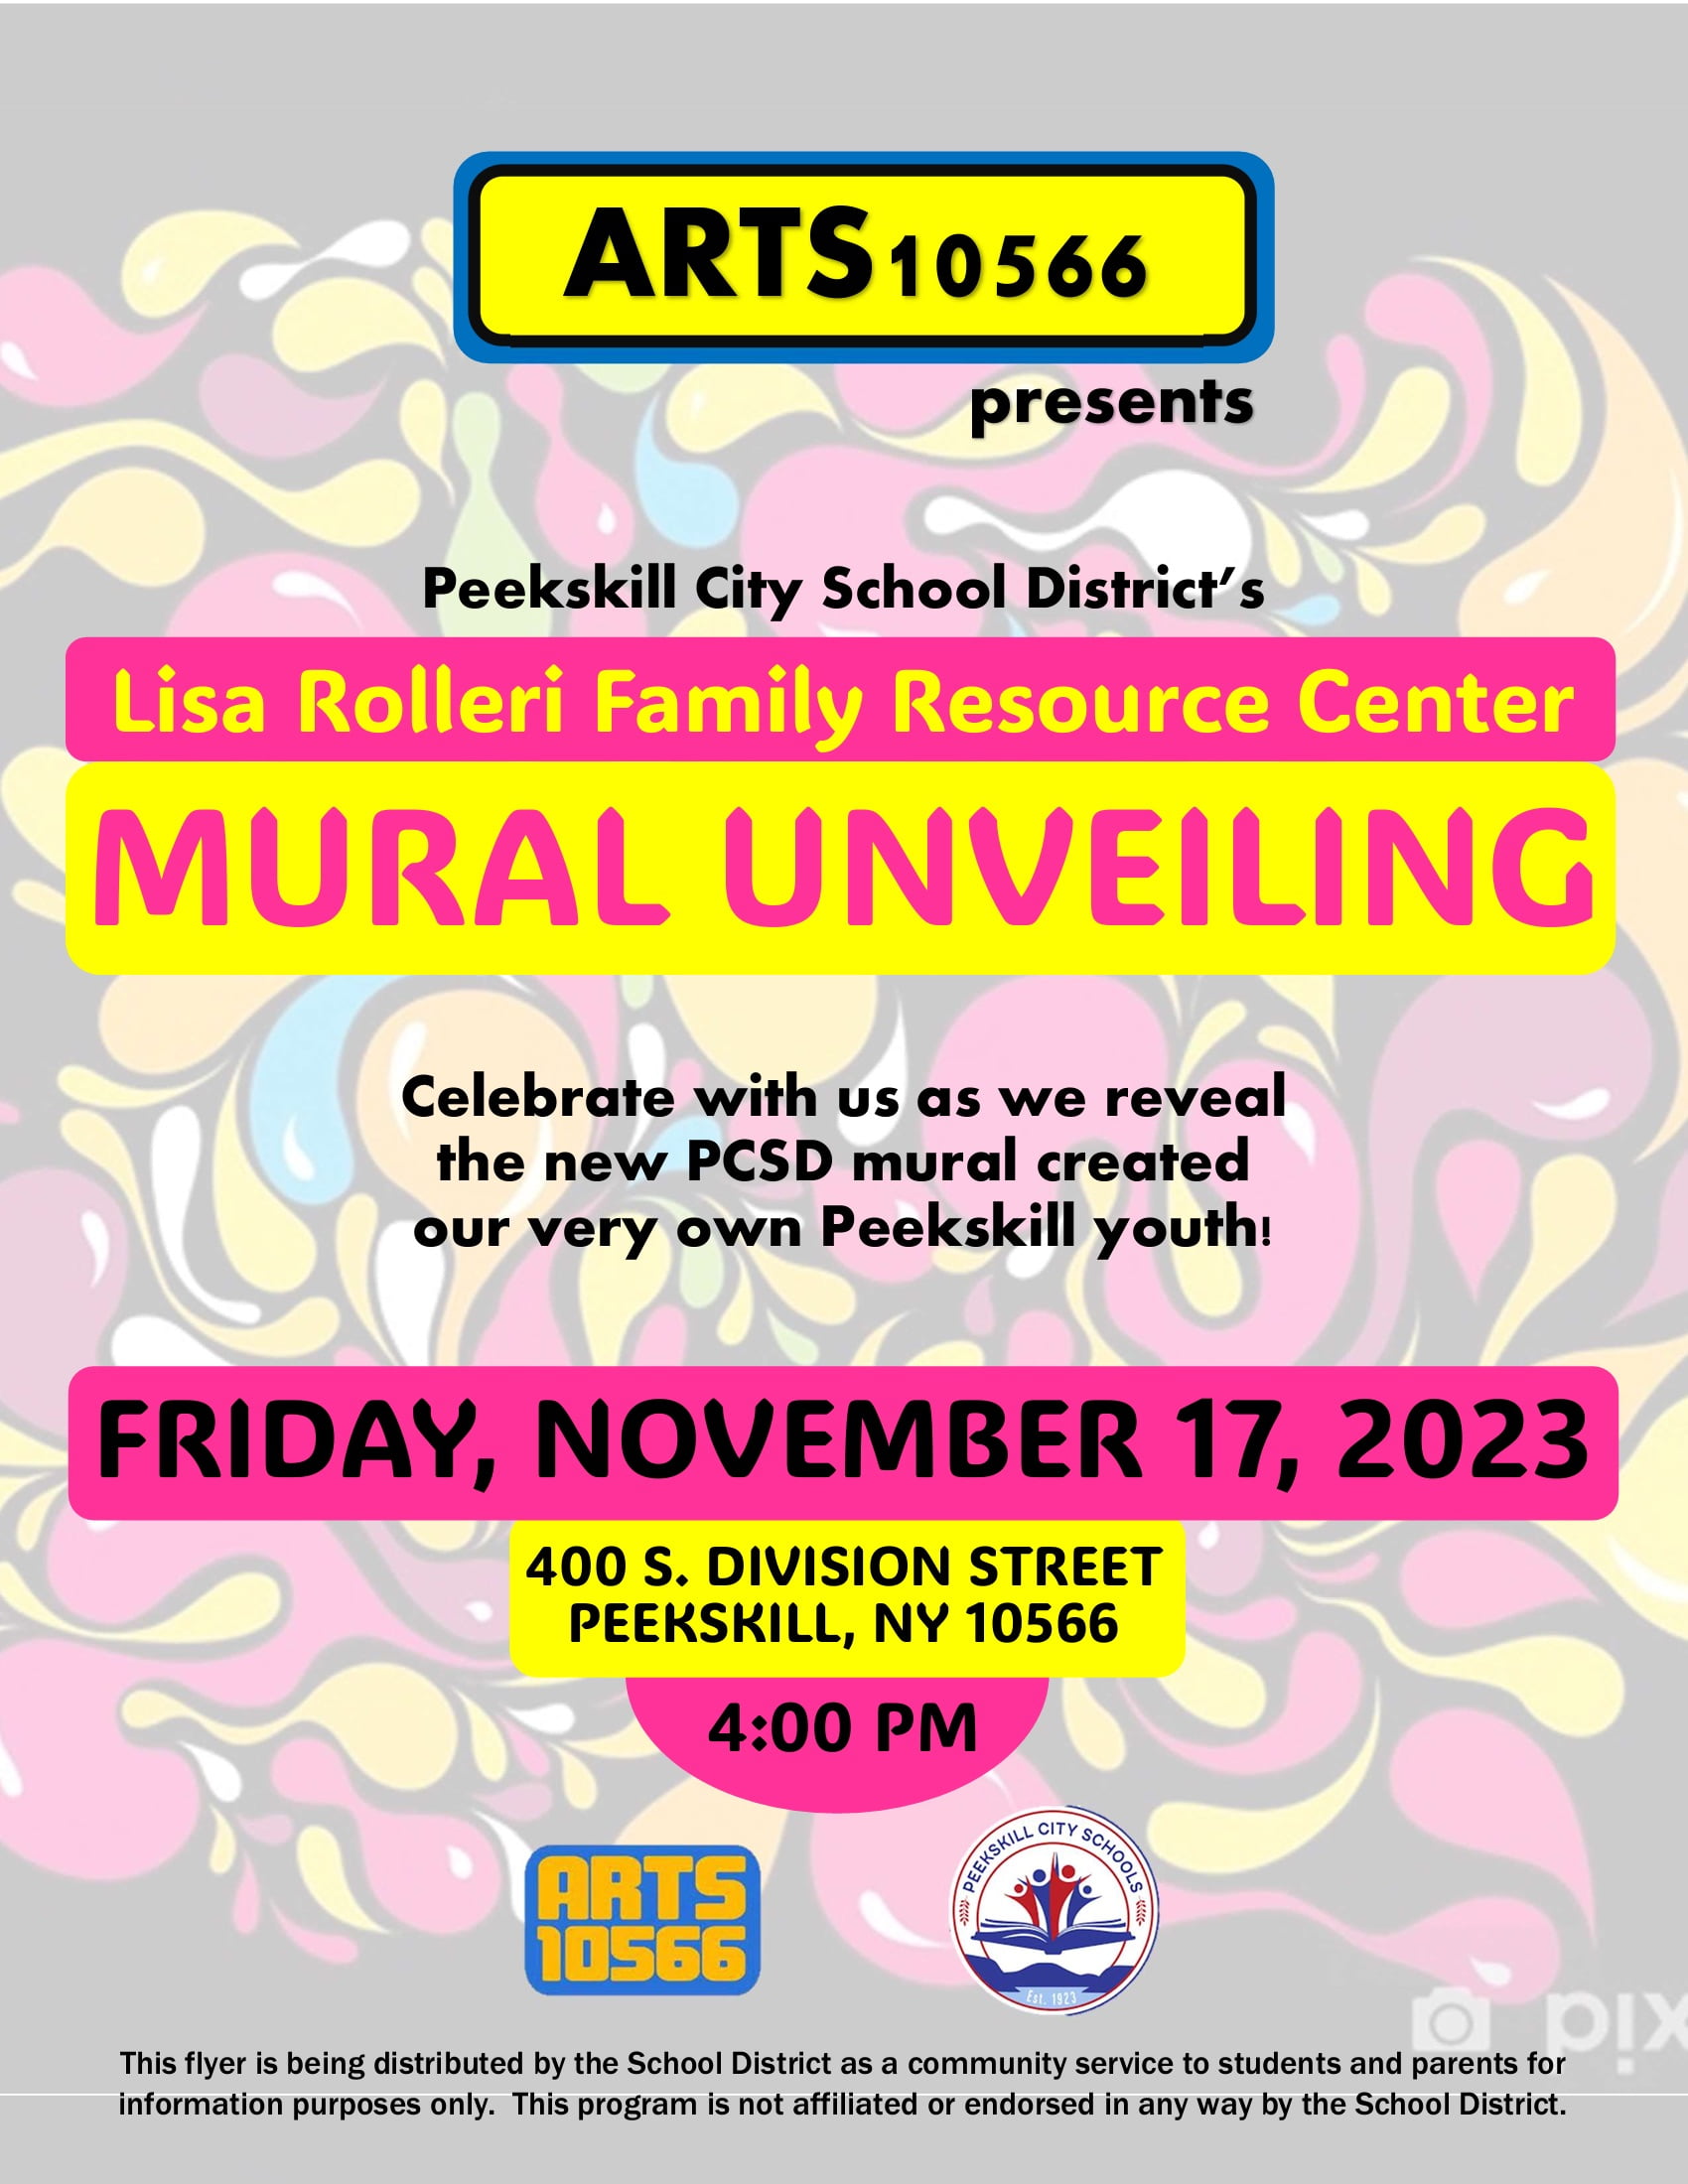 Flyer for Arts 10566 Mural Unveiling